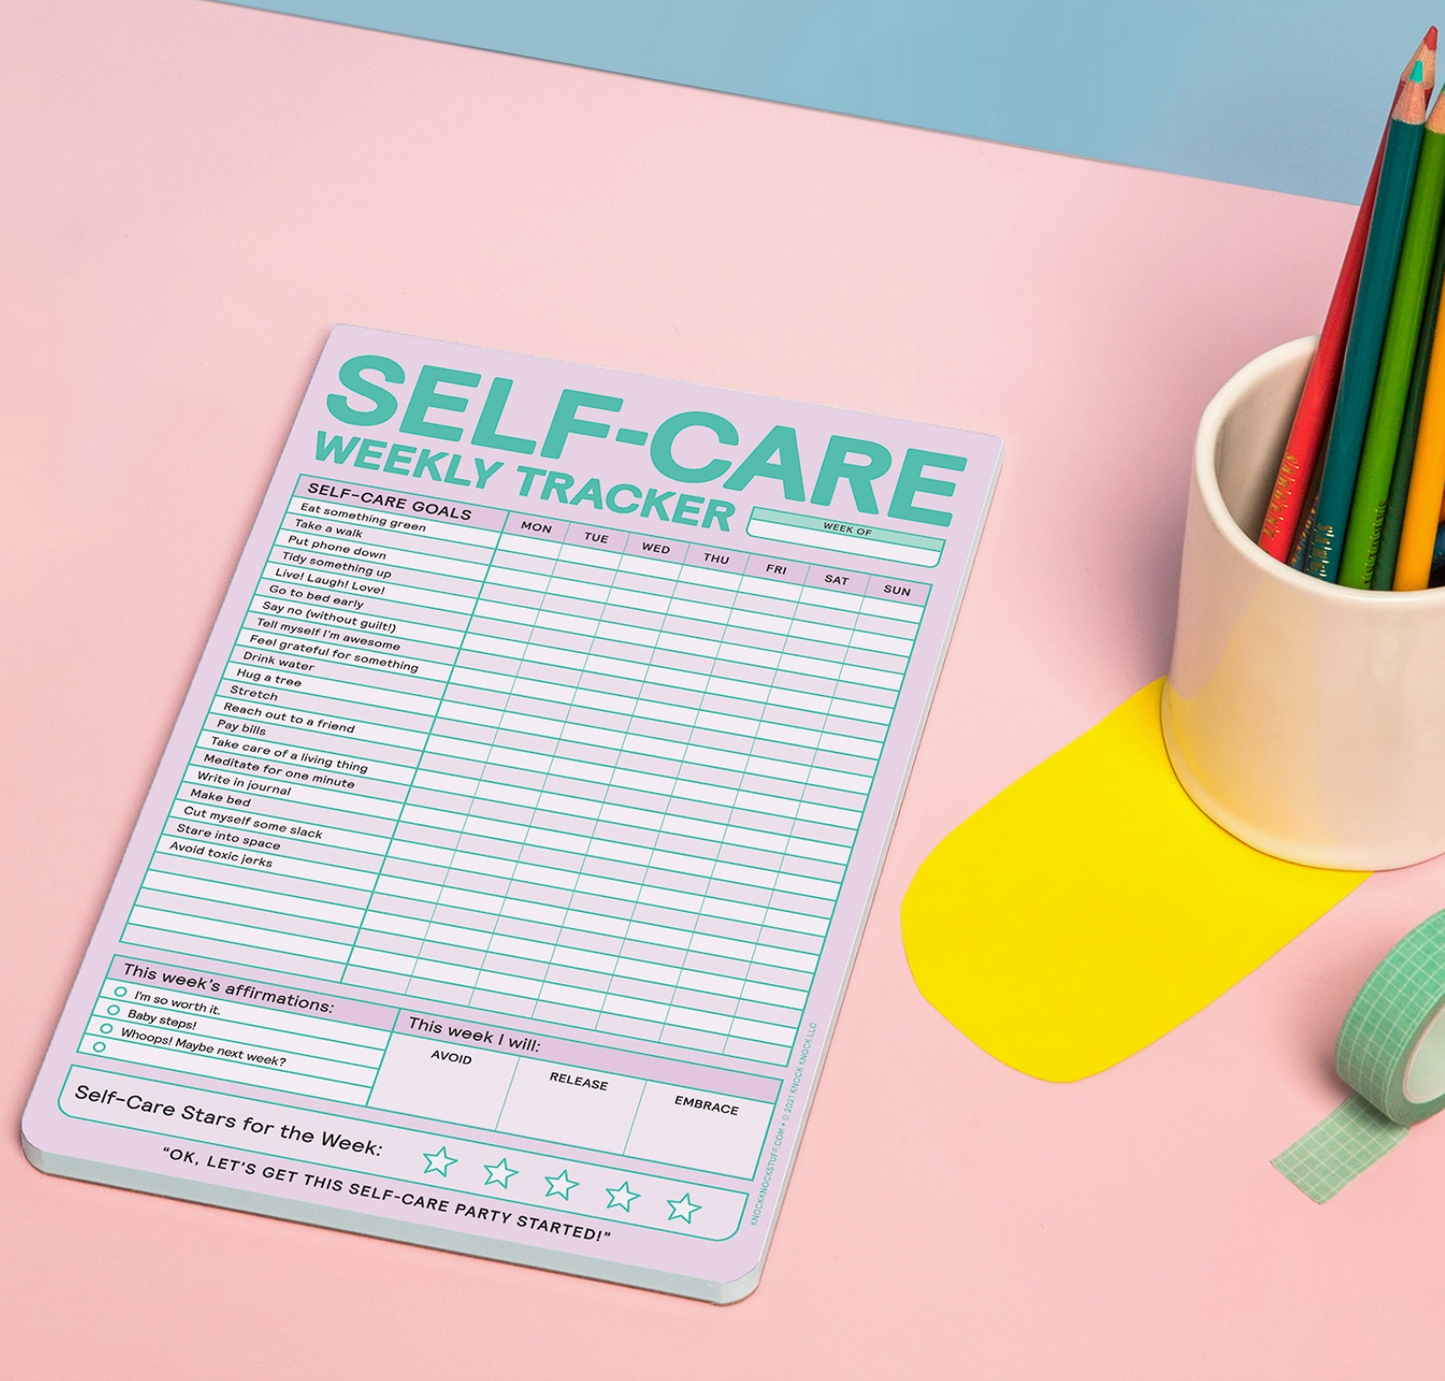 Self-Care Weekly Tracker Notepad - 60 Sheets